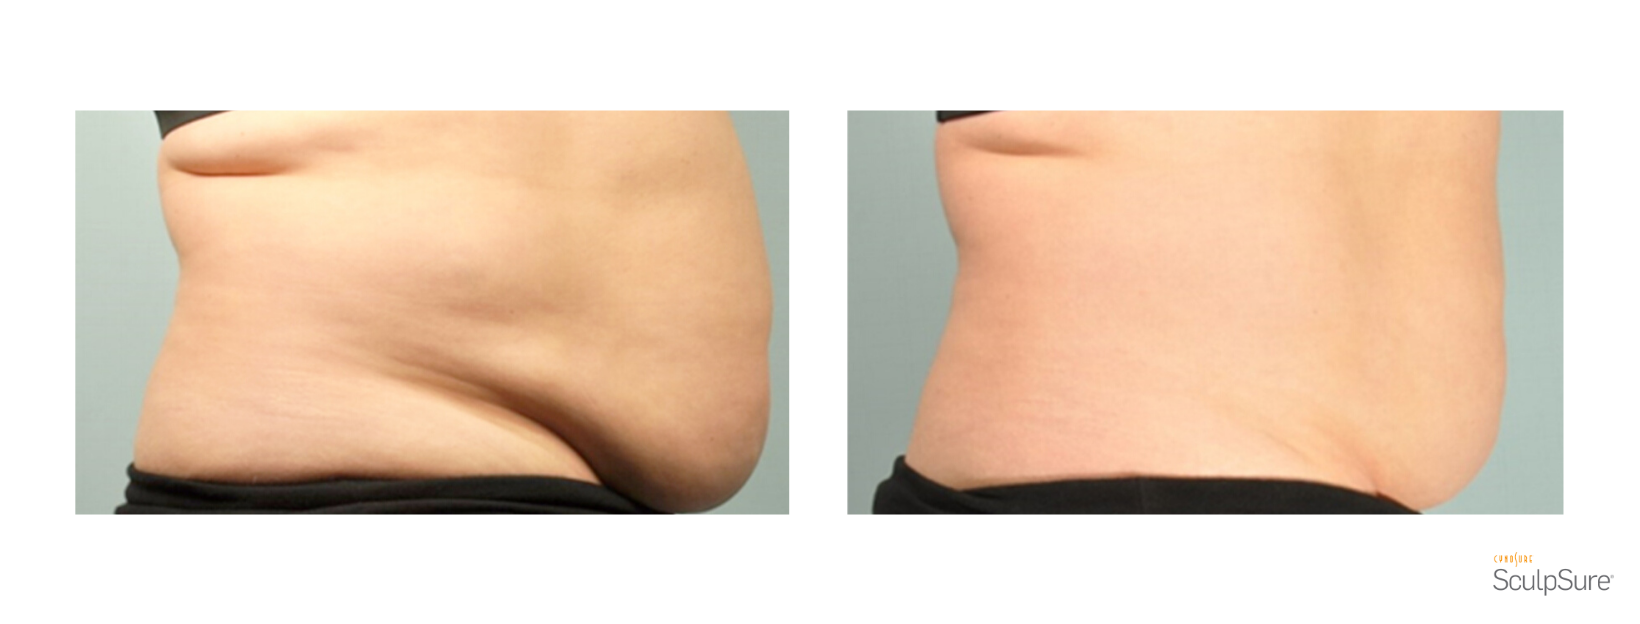 SculpSure Stomach